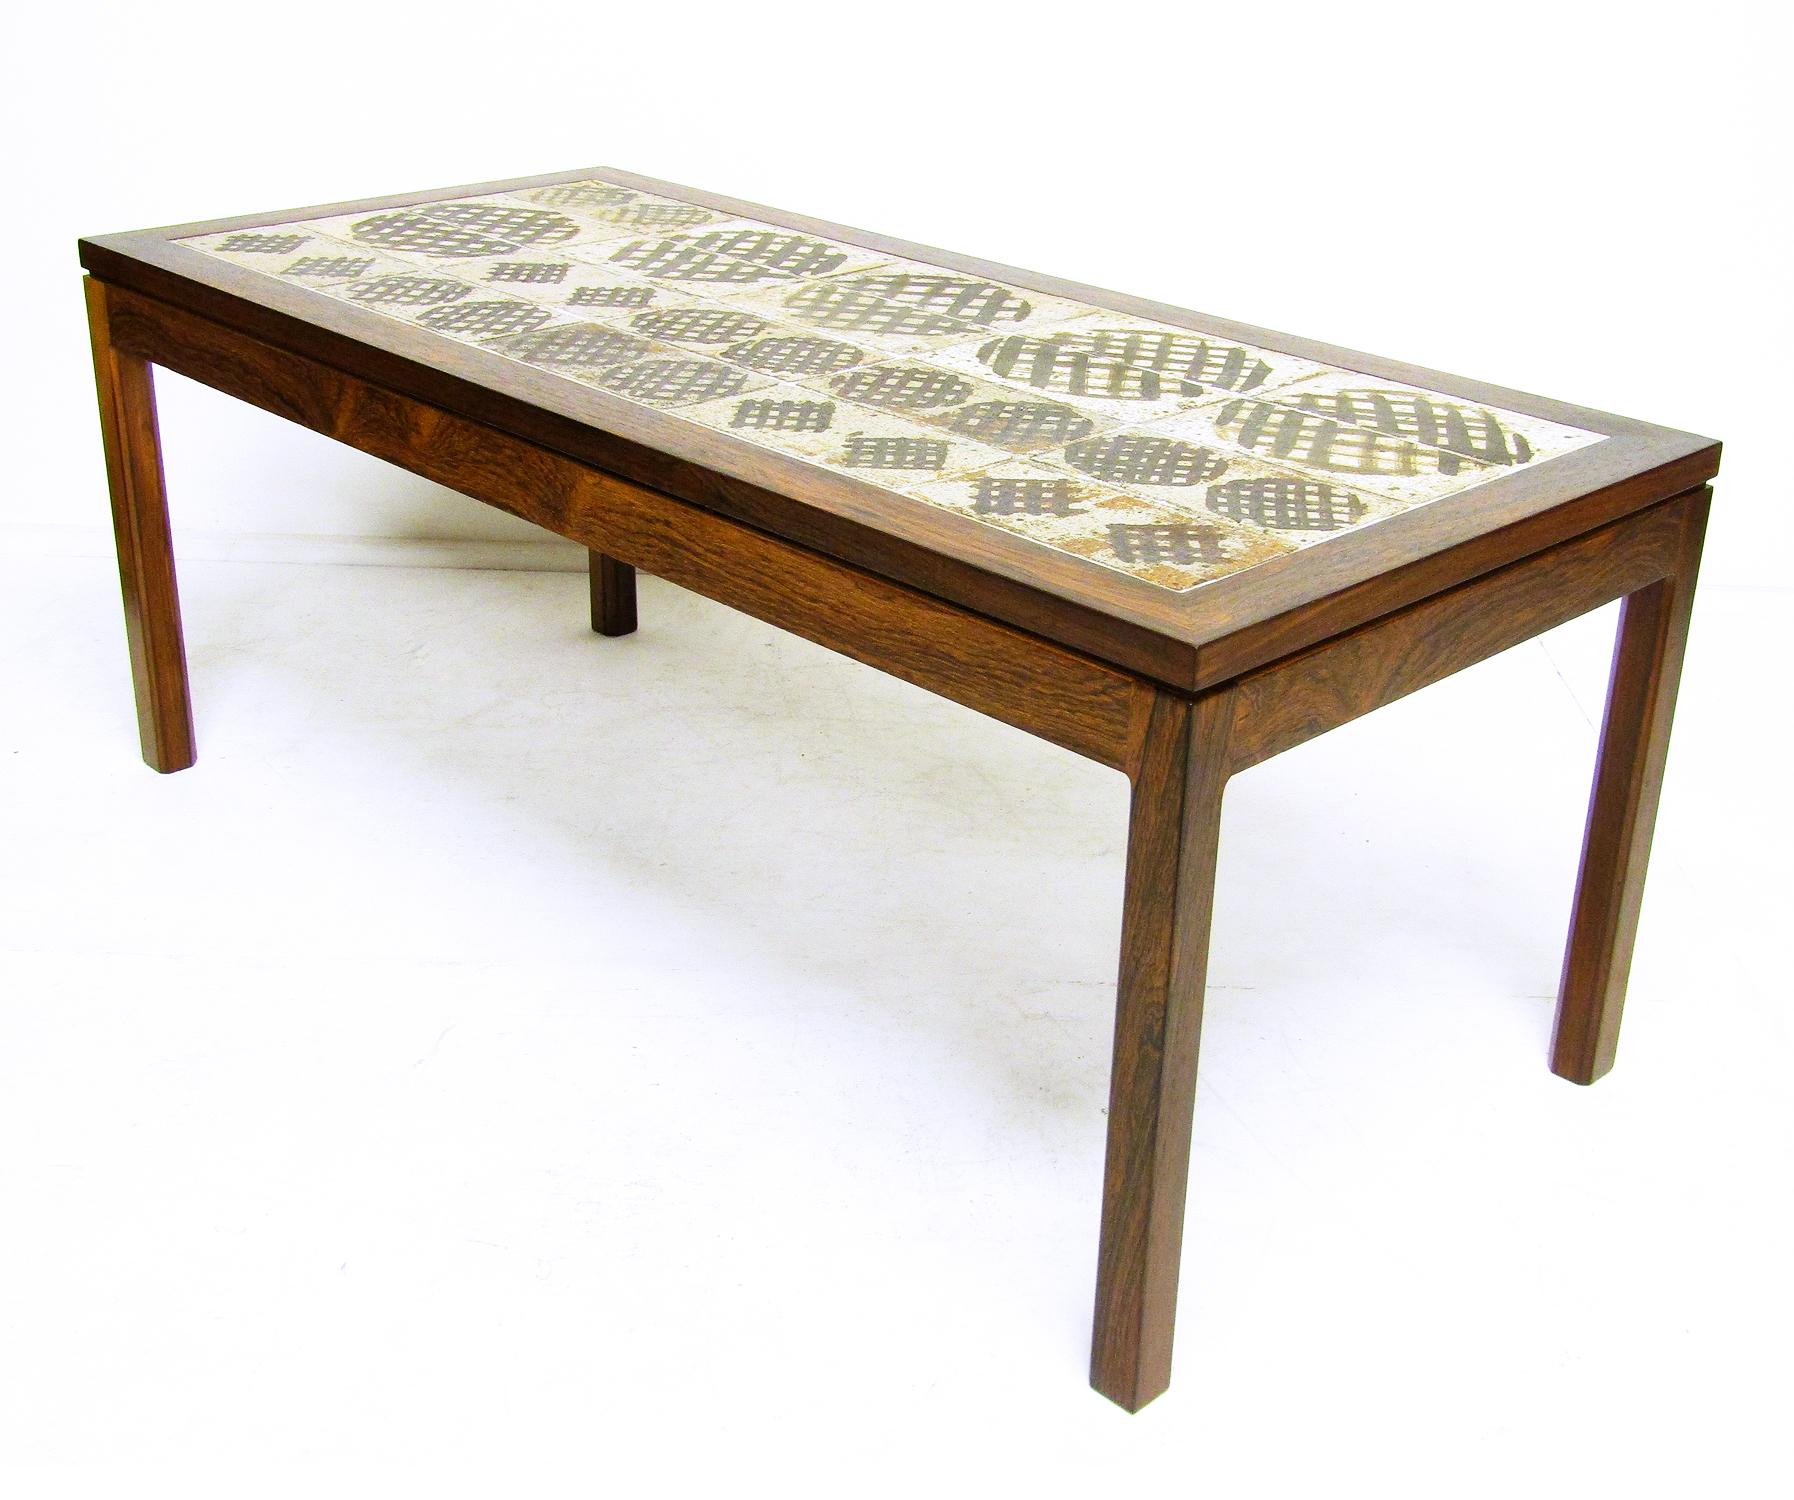 Ceramic Large 1970s Danish Art Tile Coffee Table in Rosewood by Tue Poulsen & Eric Wörtz For Sale